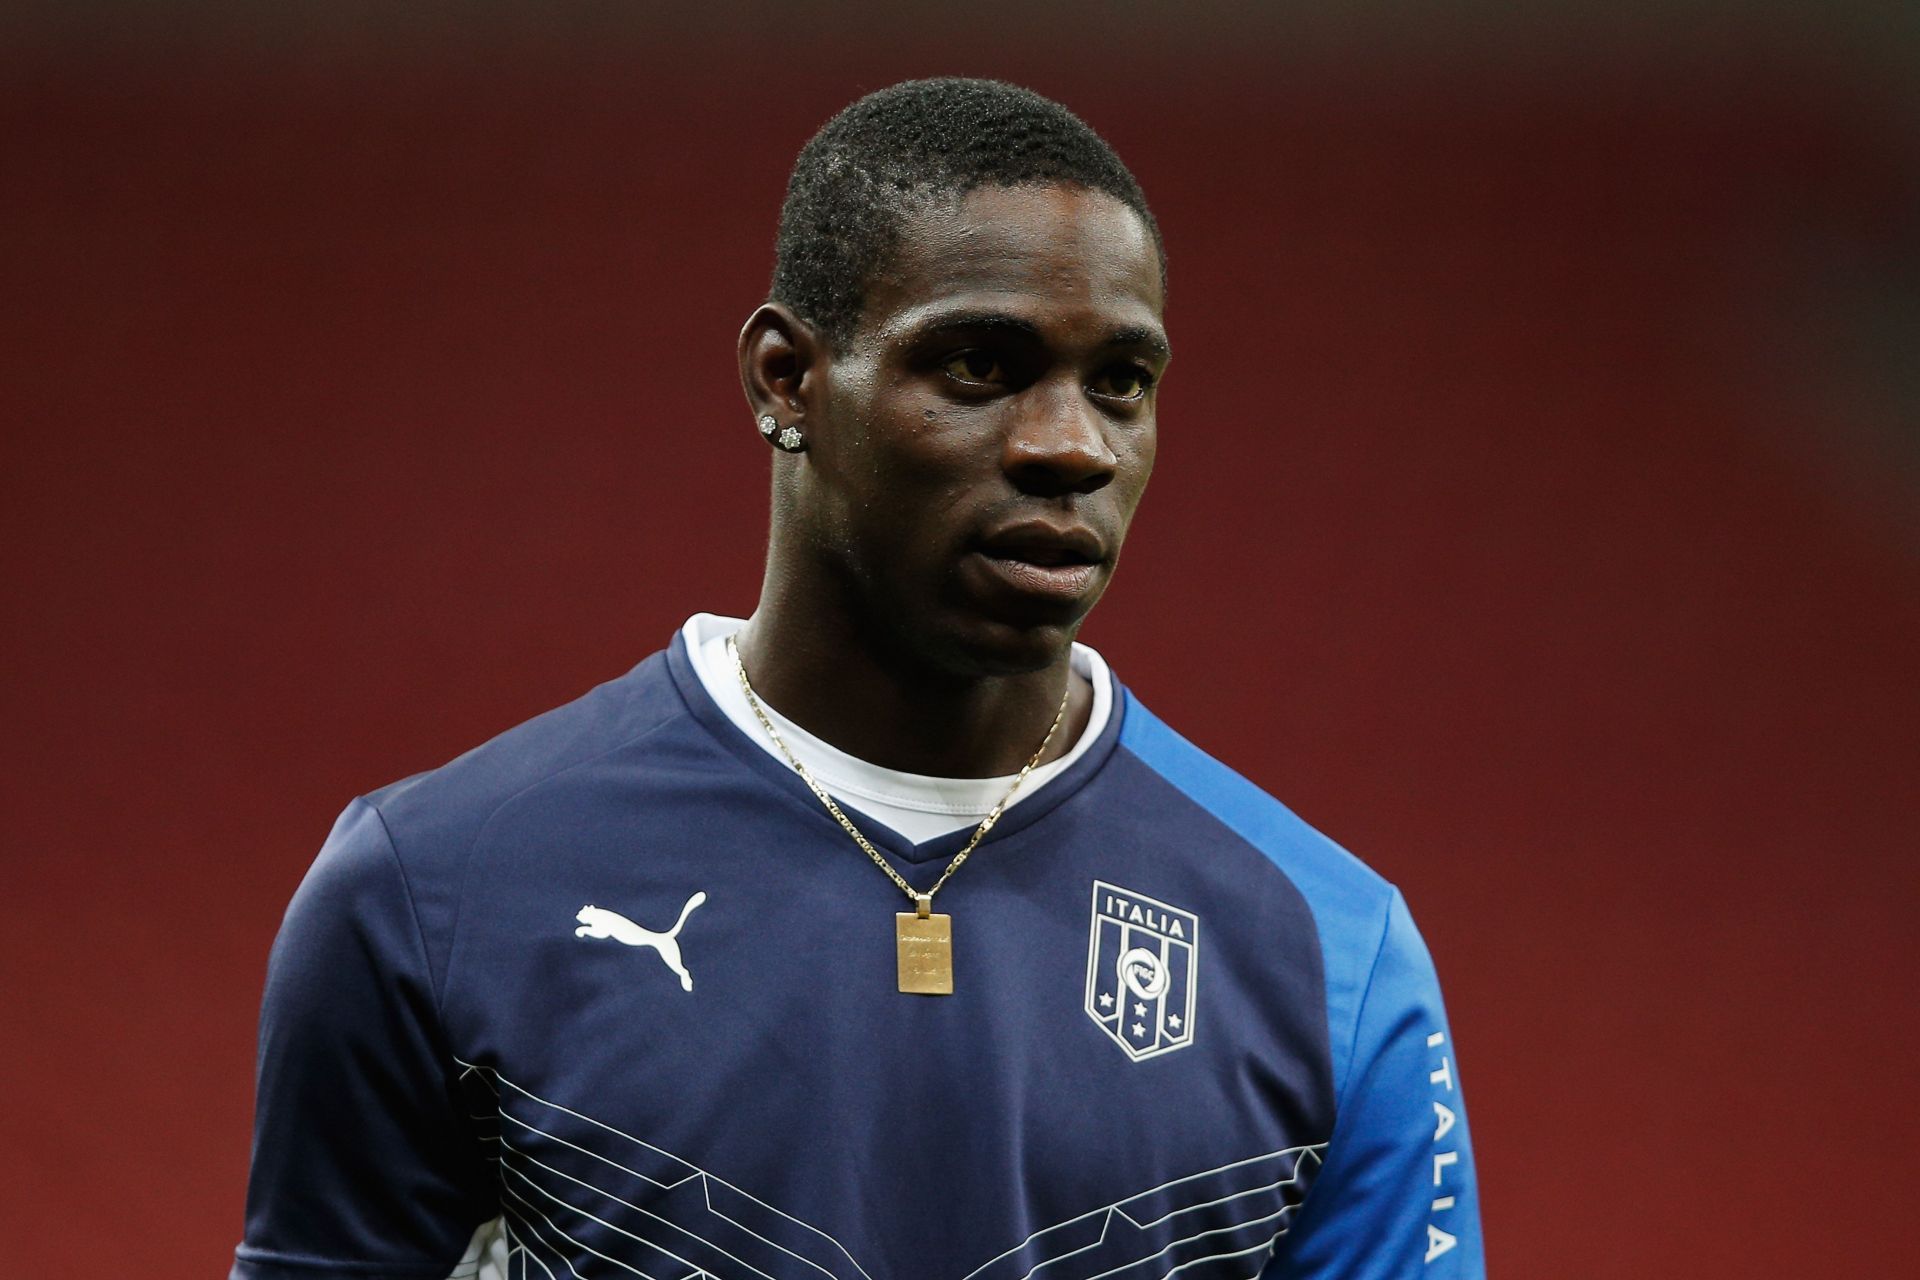 Mario Balotelli was one of the most exciting prospects in world football entering the 2010s.